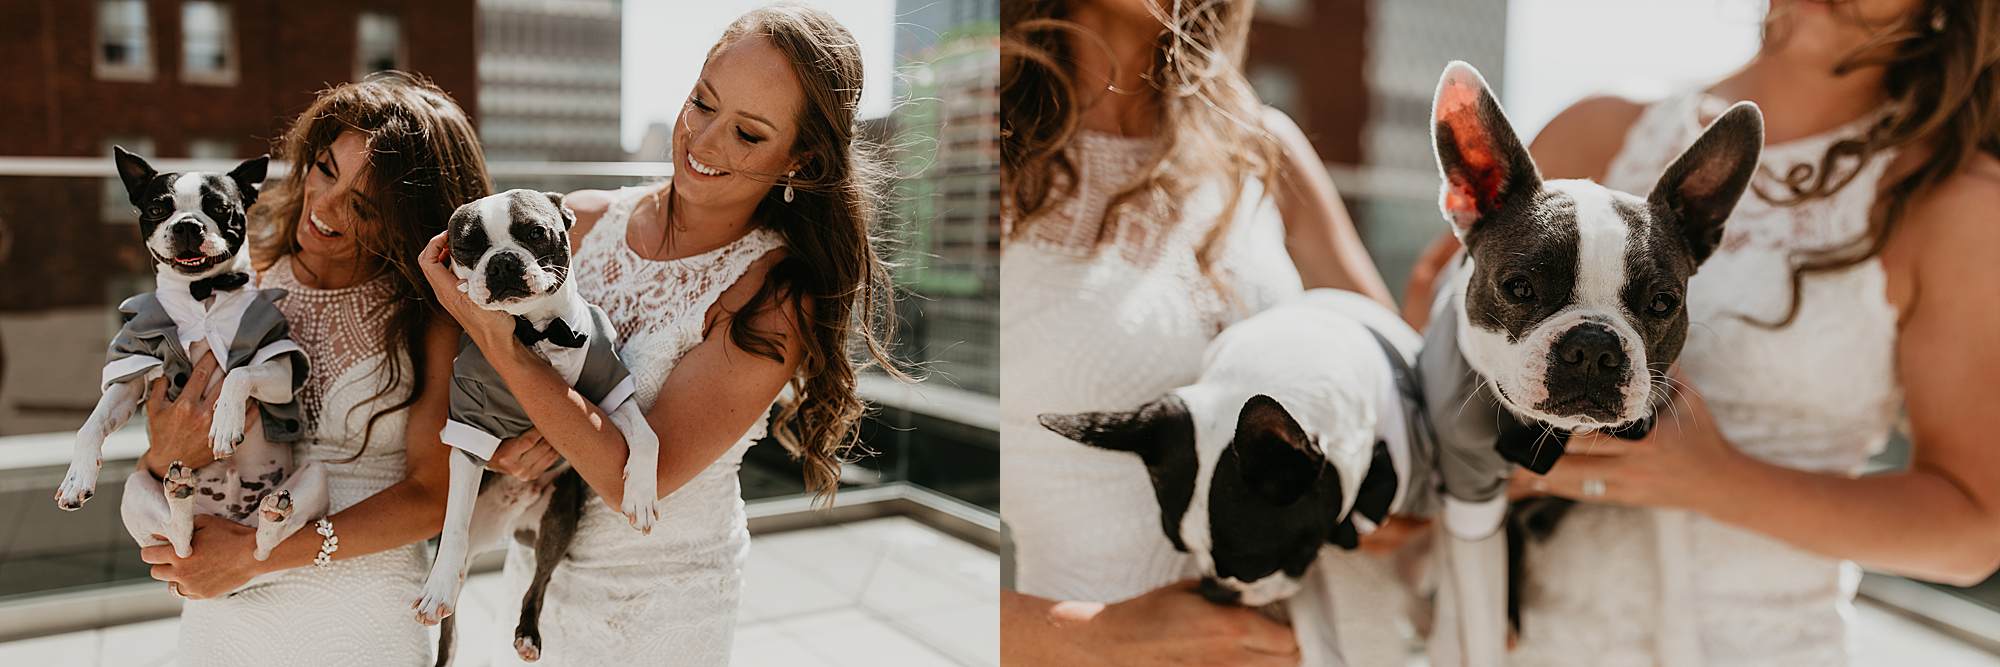 PIttsburgh Wedding Photography, Pittsburgh Gay Wedding, Dogs in suits